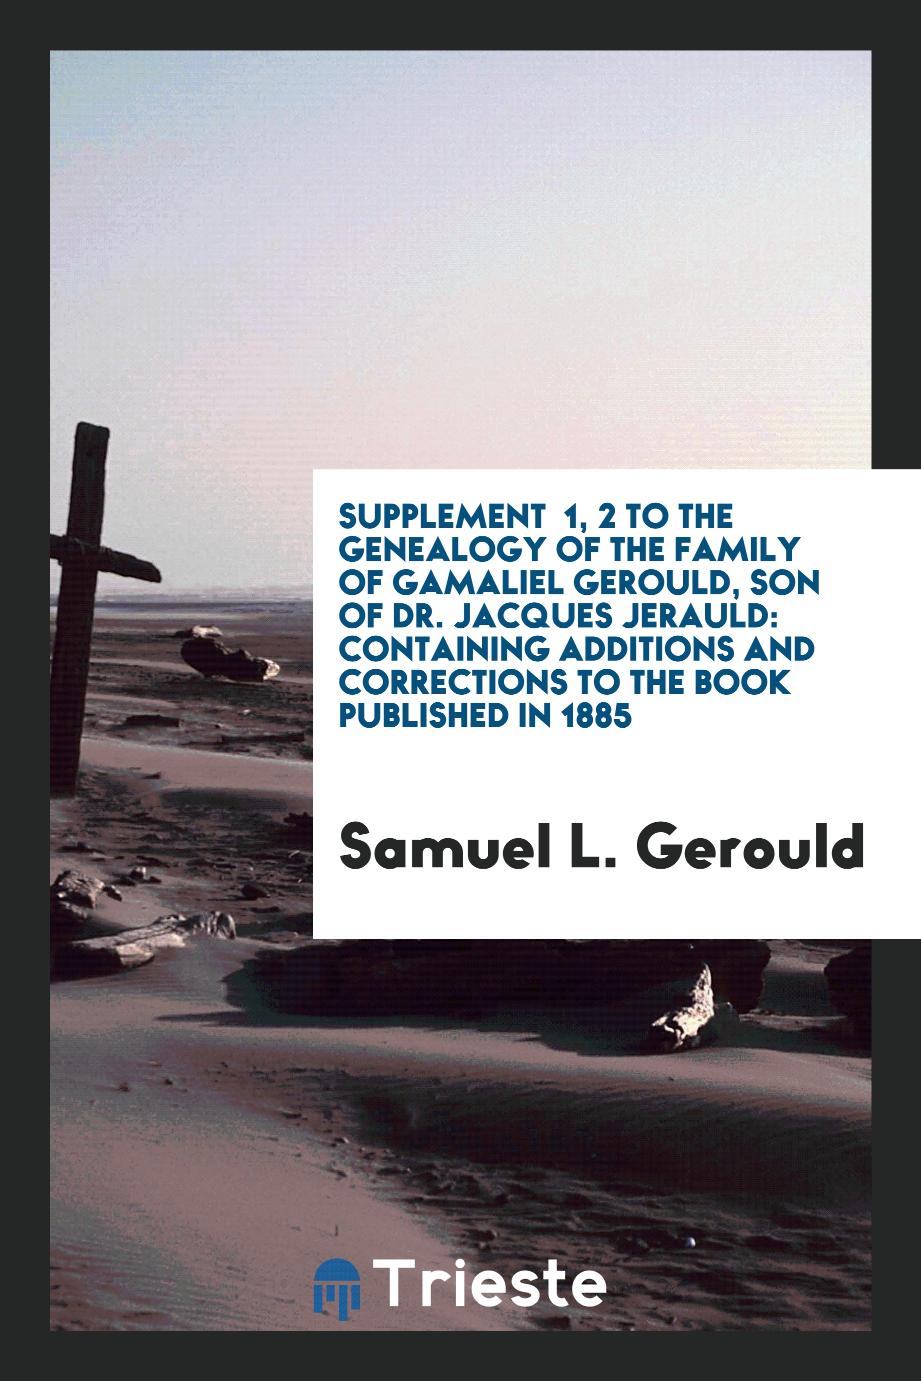 Supplement № 1, 2 to the Genealogy of the Family of Gamaliel Gerould, son of Dr. Jacques Jerauld: Containing Additions and Corrections to the Book Published in 1885